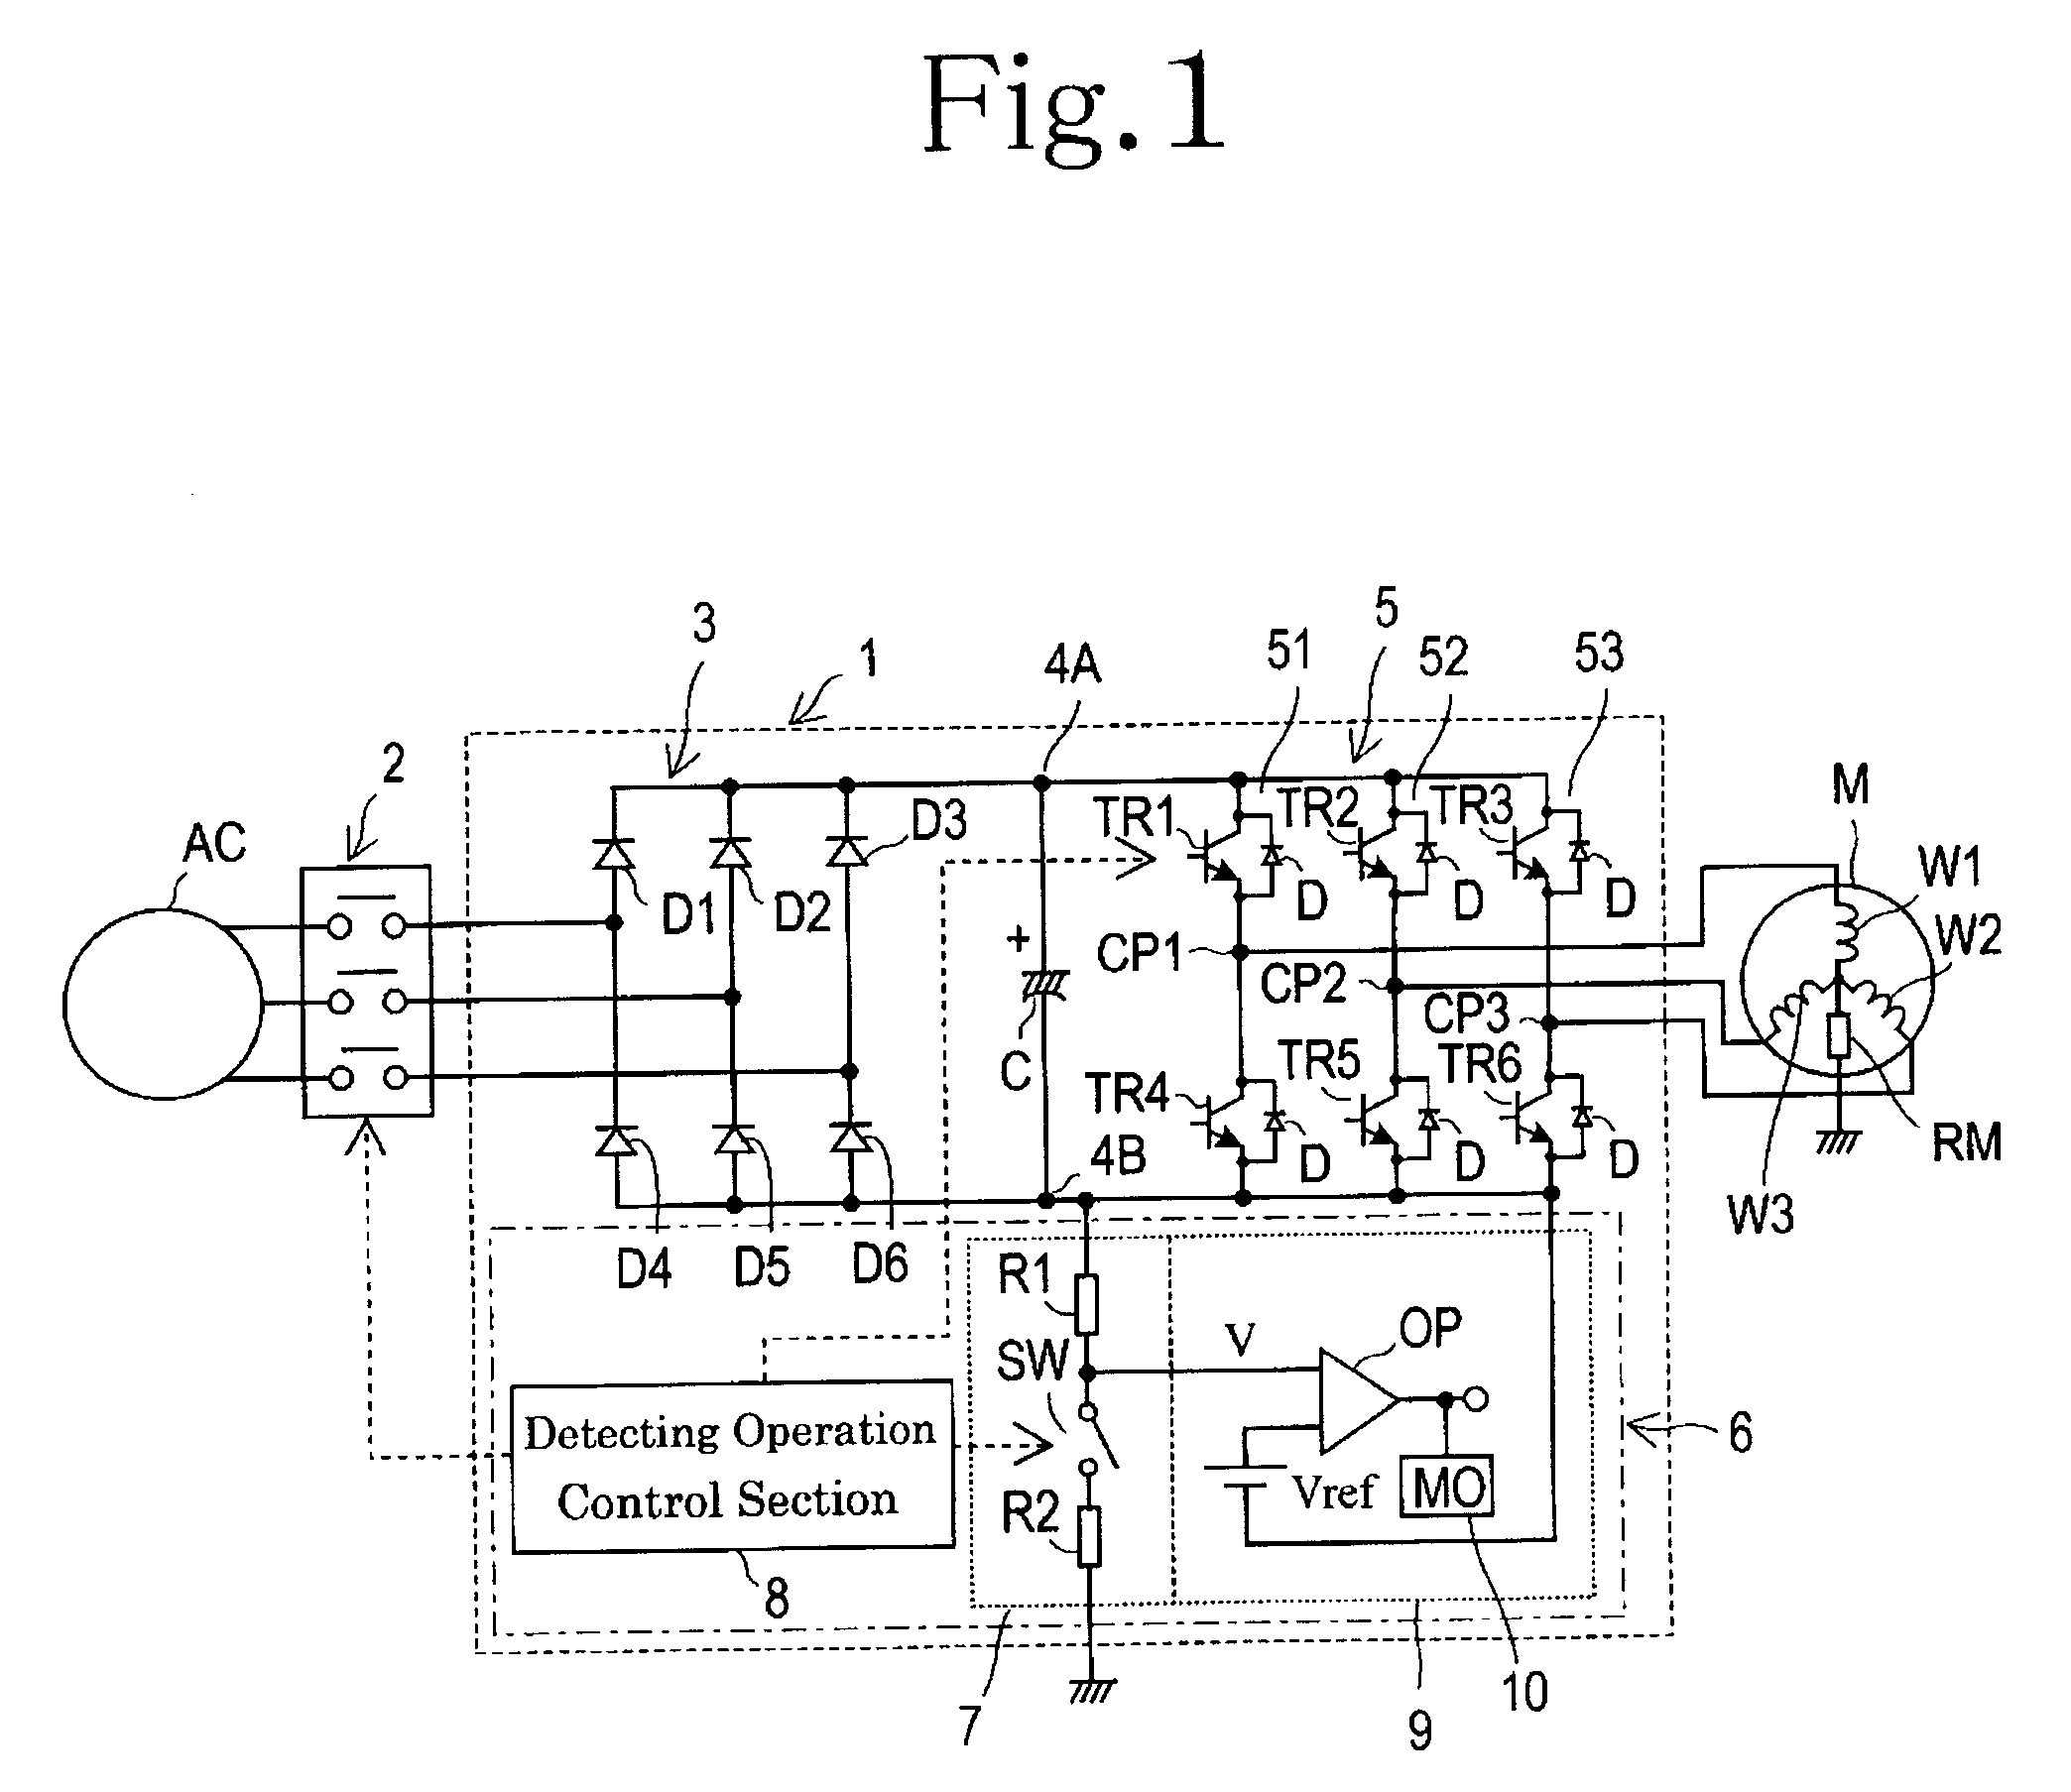 Motor control system including electrical insulation deterioration detecting system